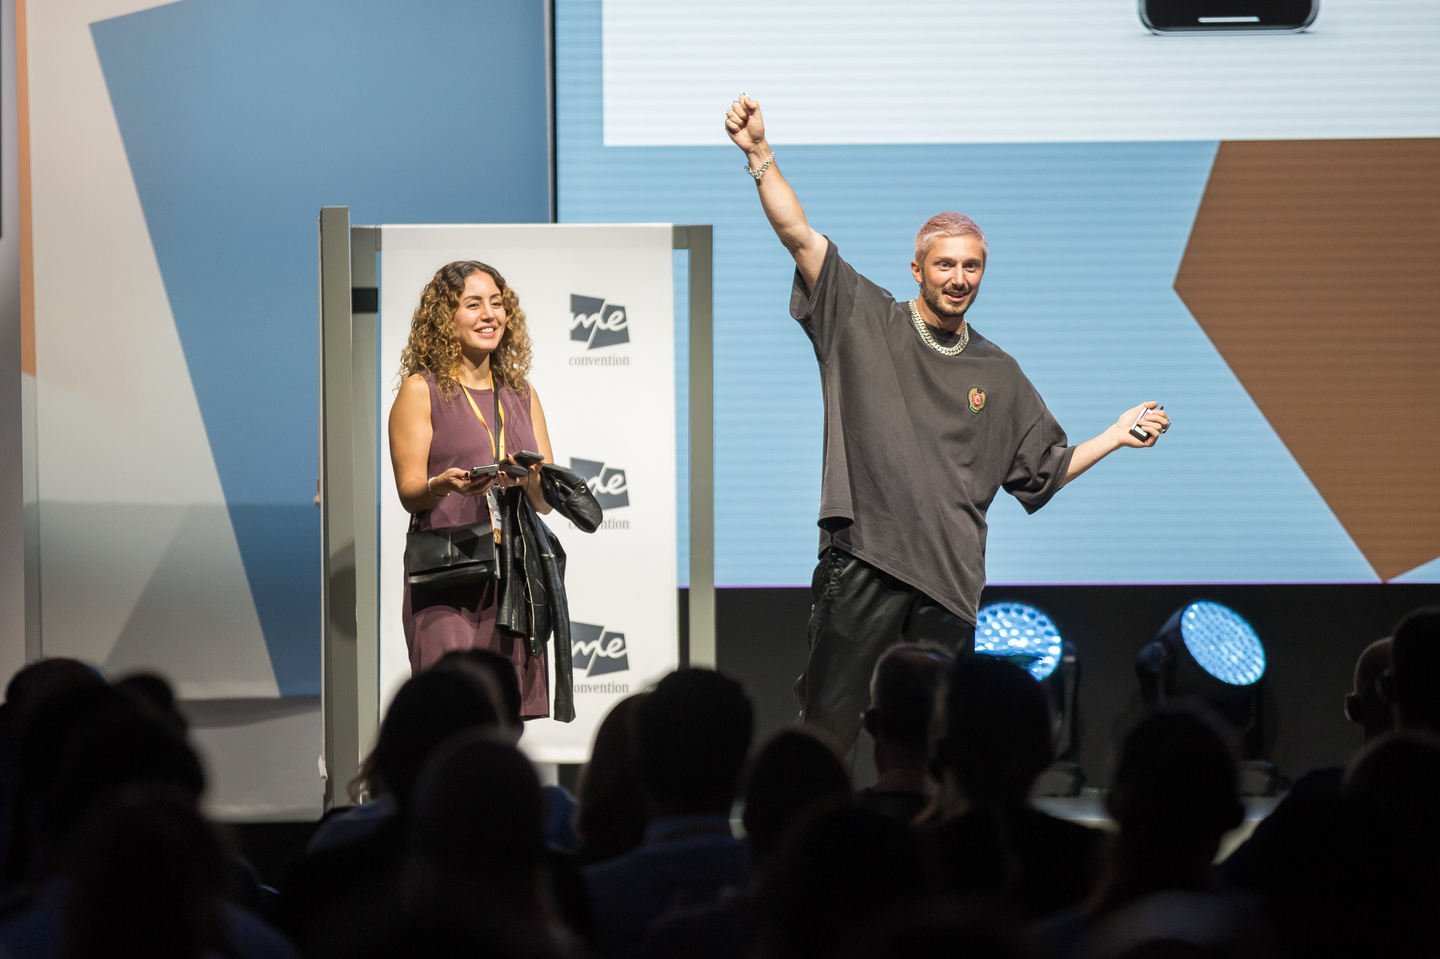 Tech magician Tom London dazzled the crowd. Photo by Markus Nass/Daimler AG